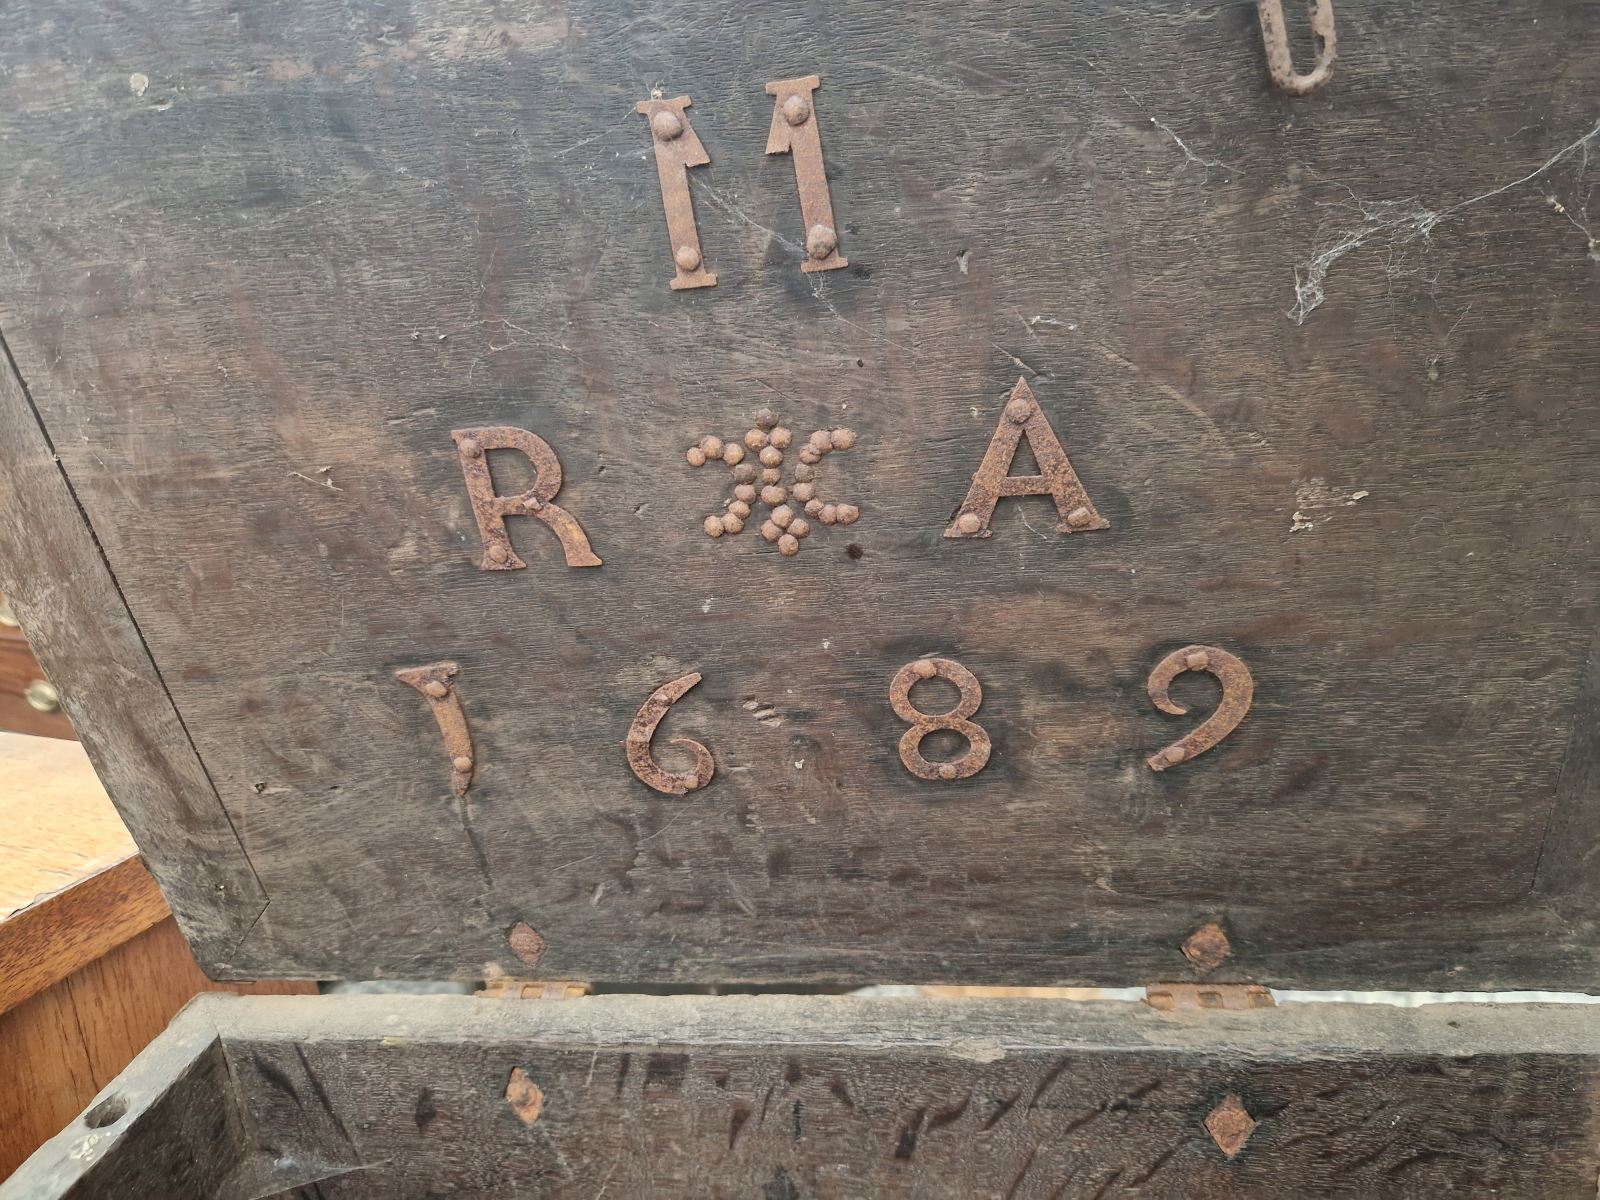 AN IRON BOUND TWO HANDLED OAK STRONG BOX BEARING THE DATE 1689 INSIDE THE HINGED LID - Image 5 of 7